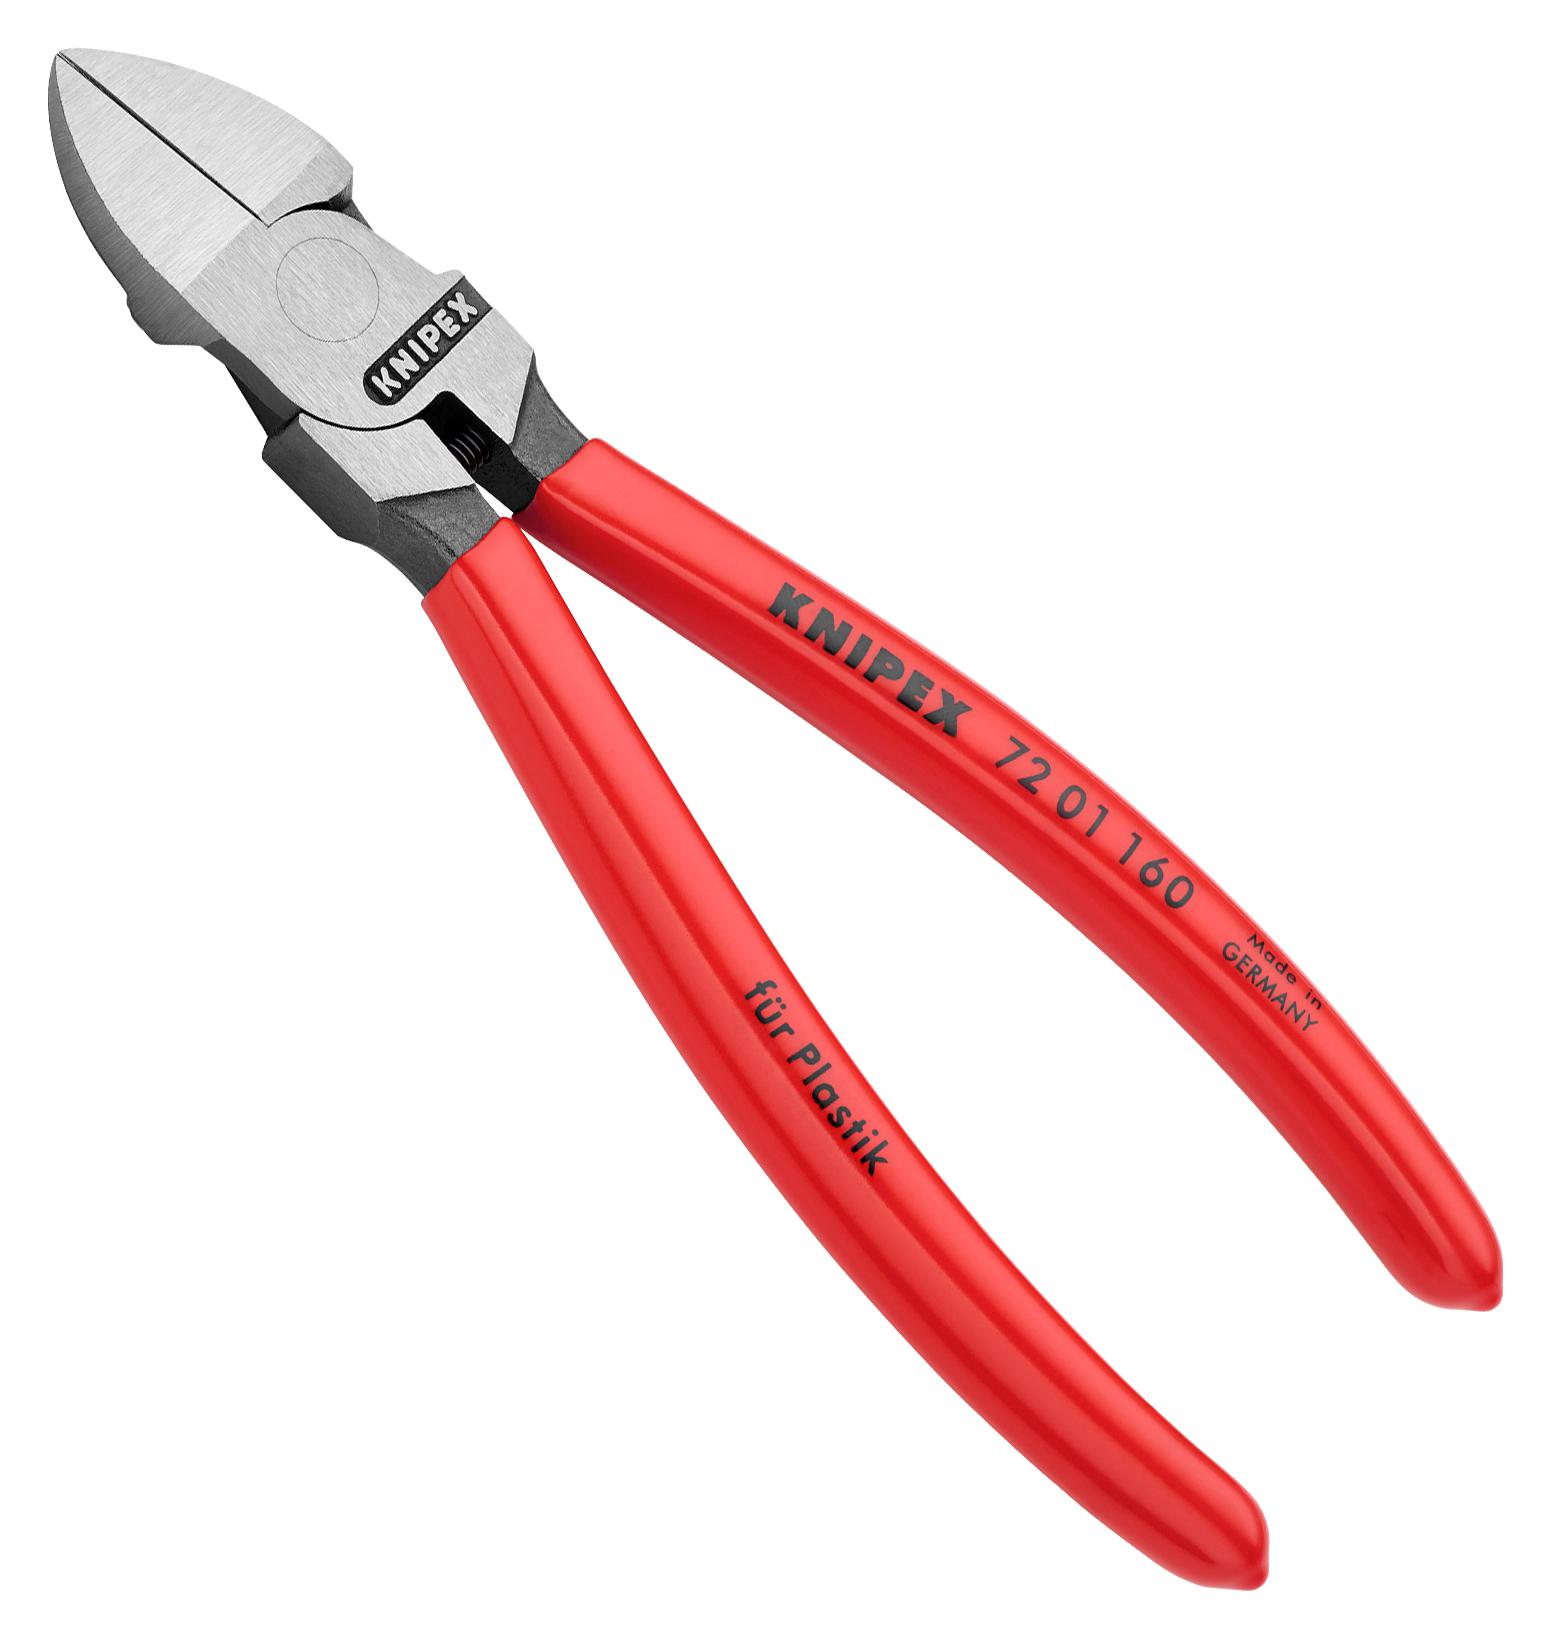 Knipex 72 01 160 Cutter, For Plastic, 160mm